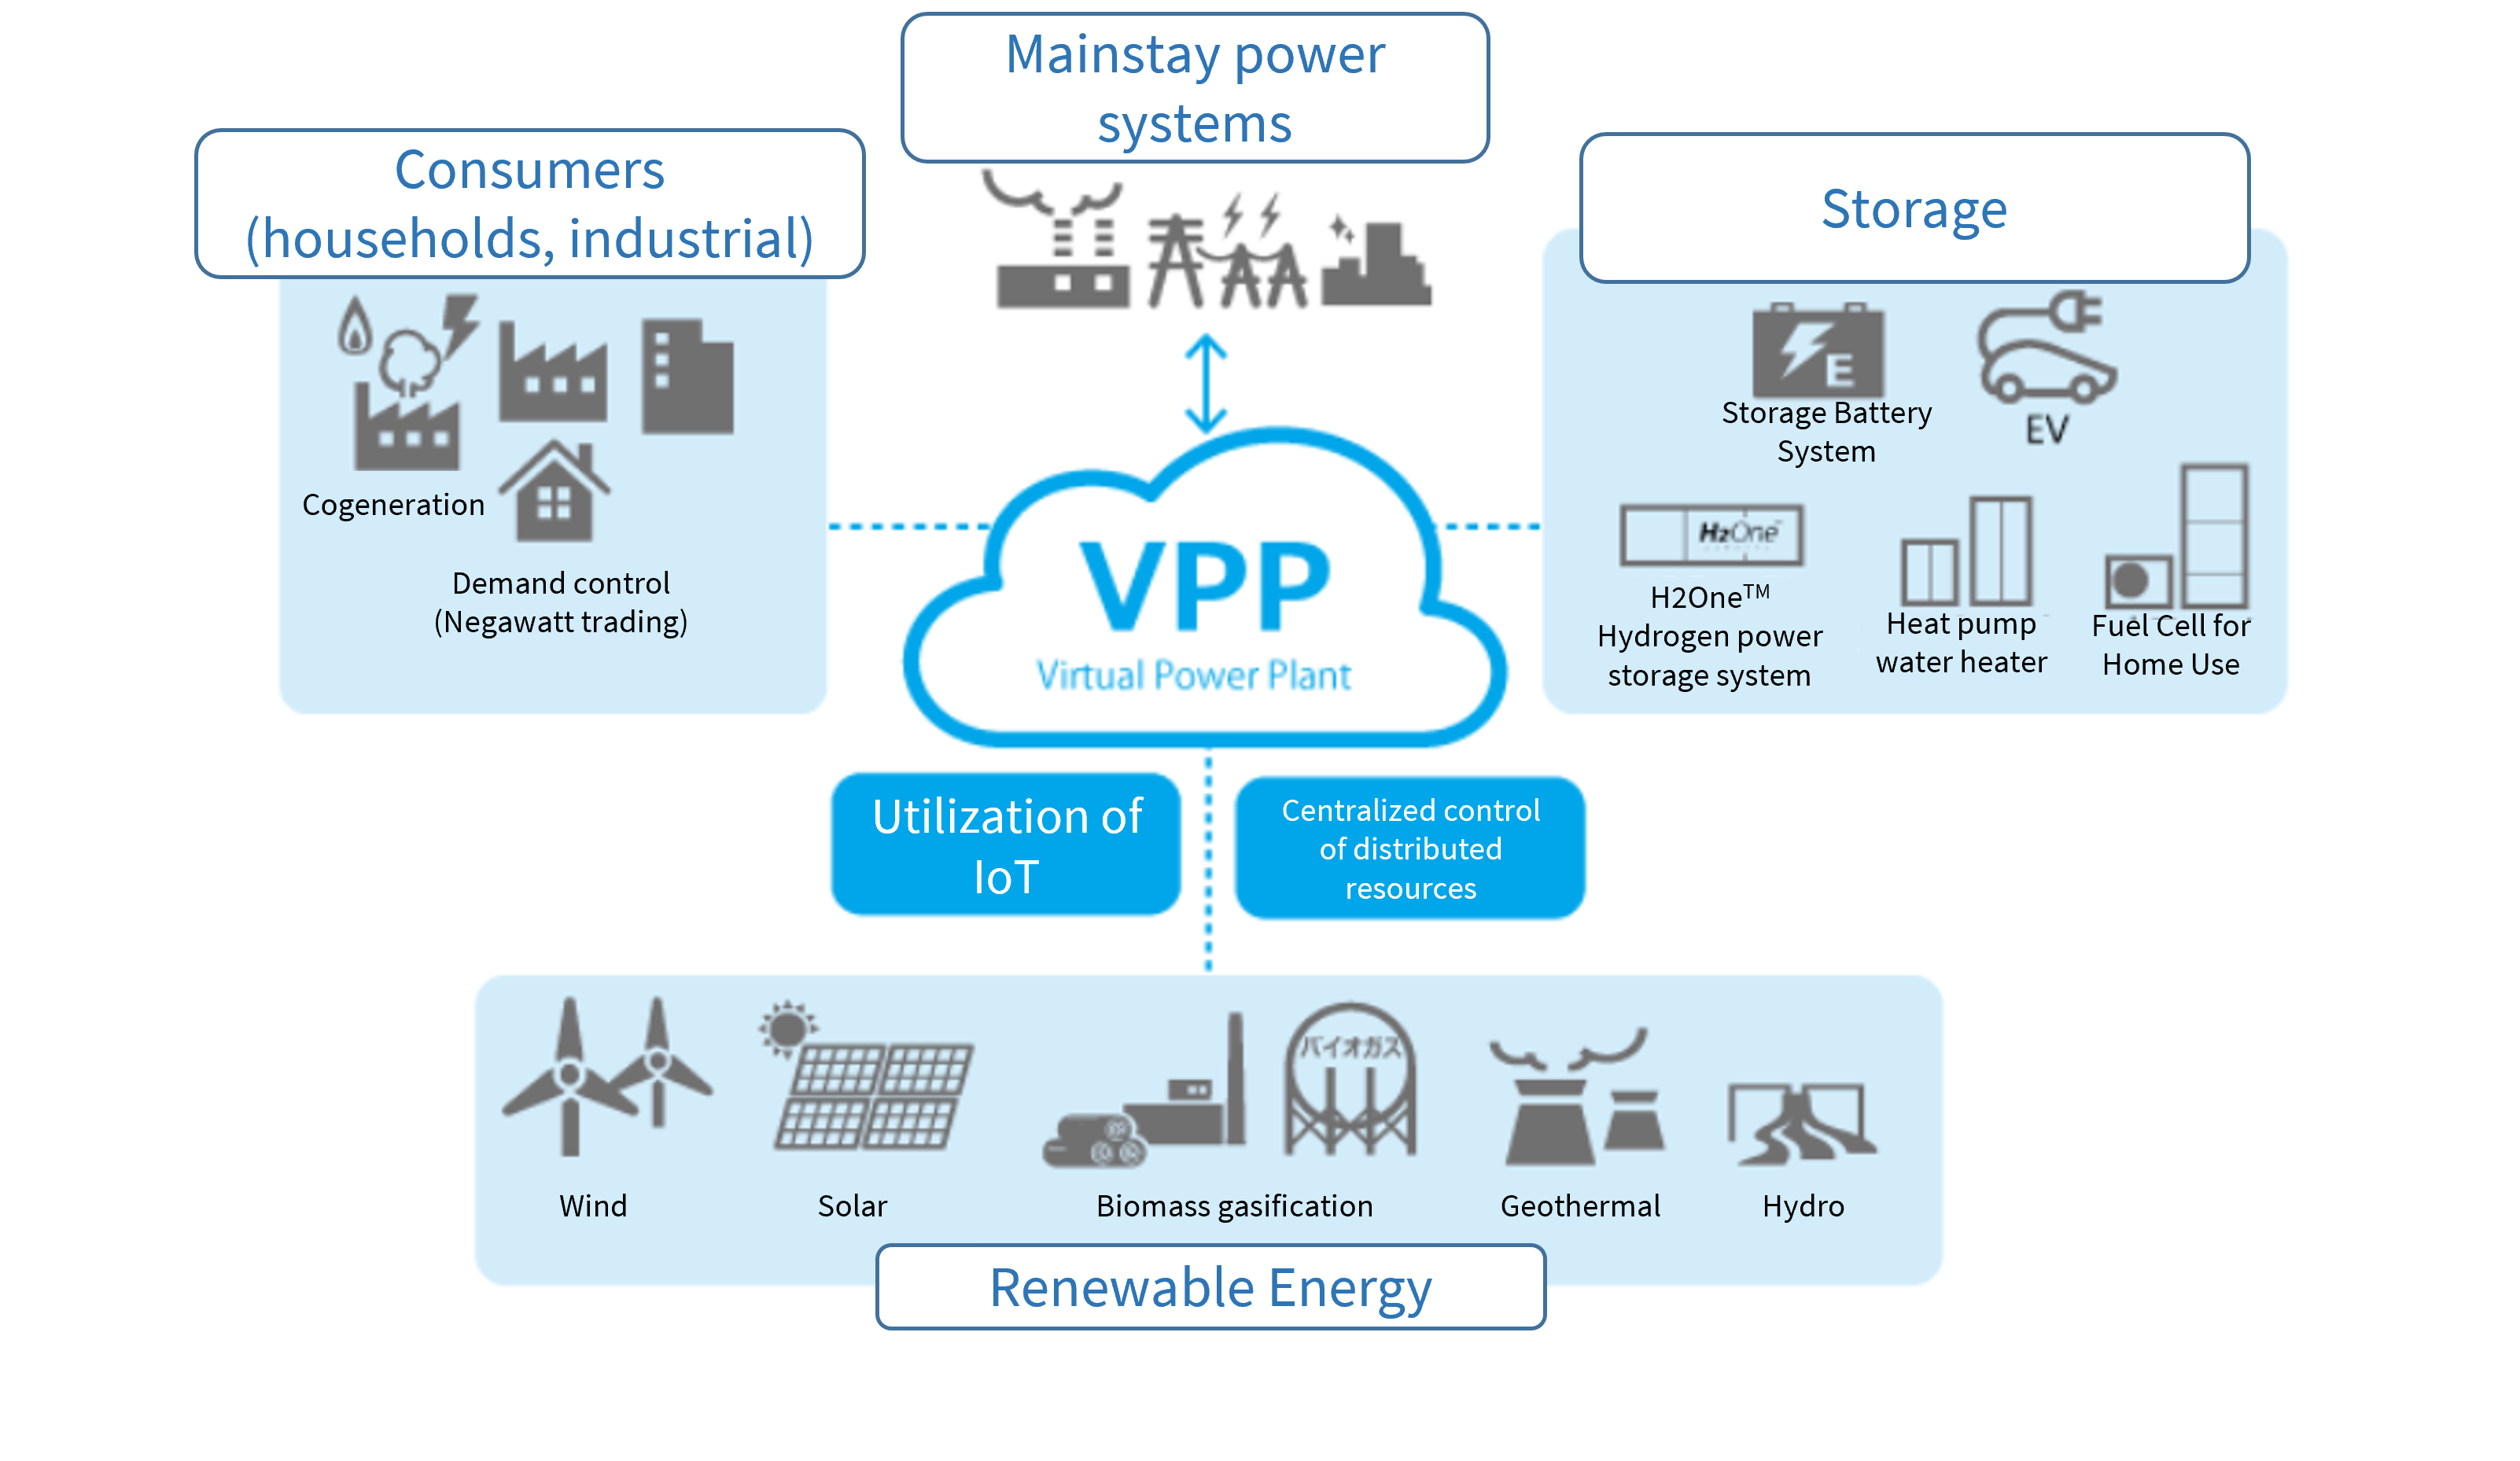 Software-defined, value-added virtual power plants